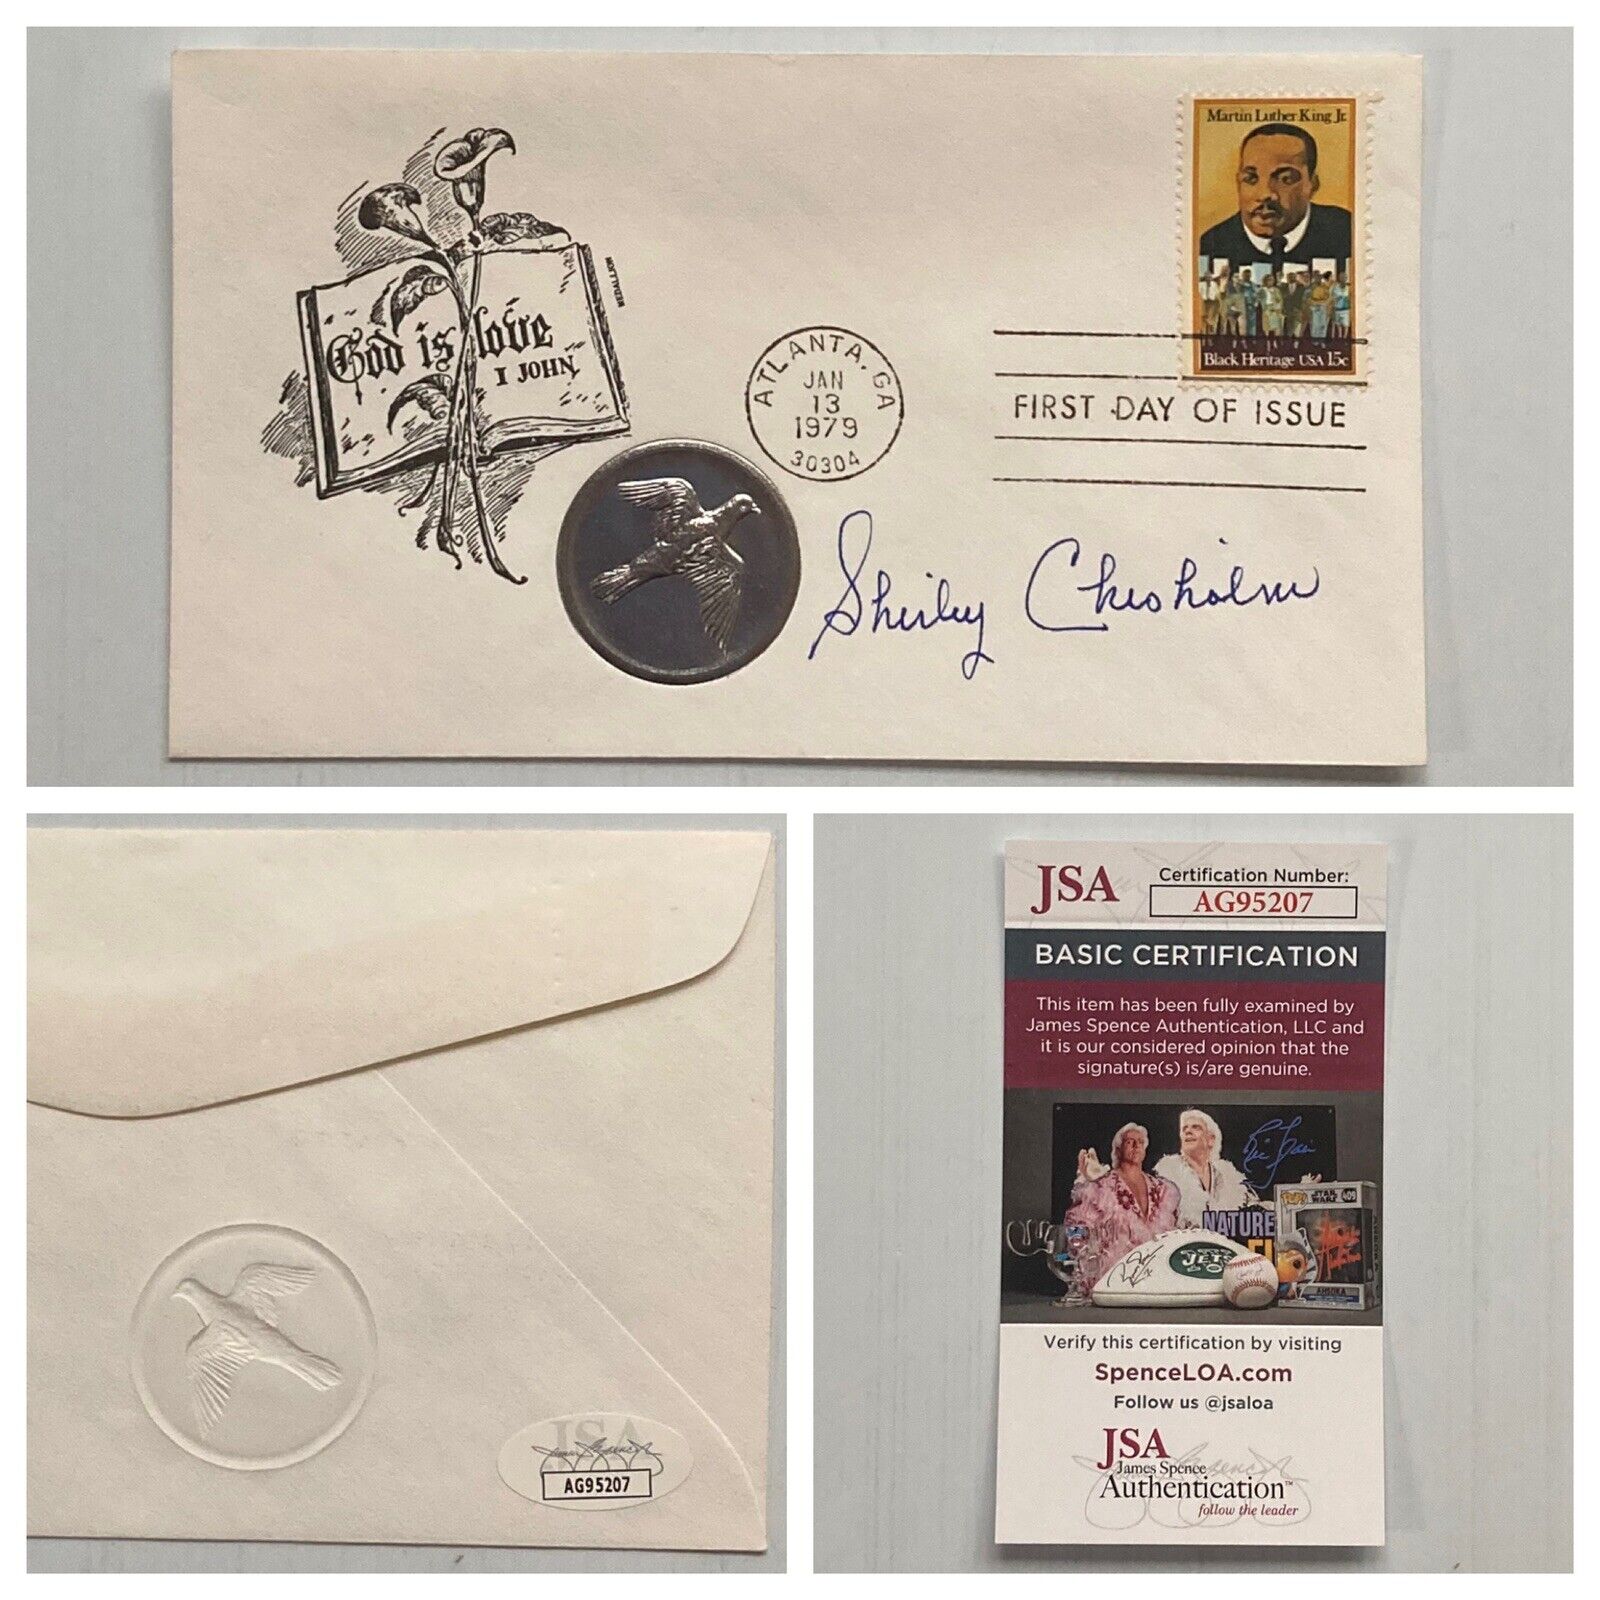 Congresswoman Shirley Chisholm Signed Autograph First Day Cover - JSA - FREE S&H